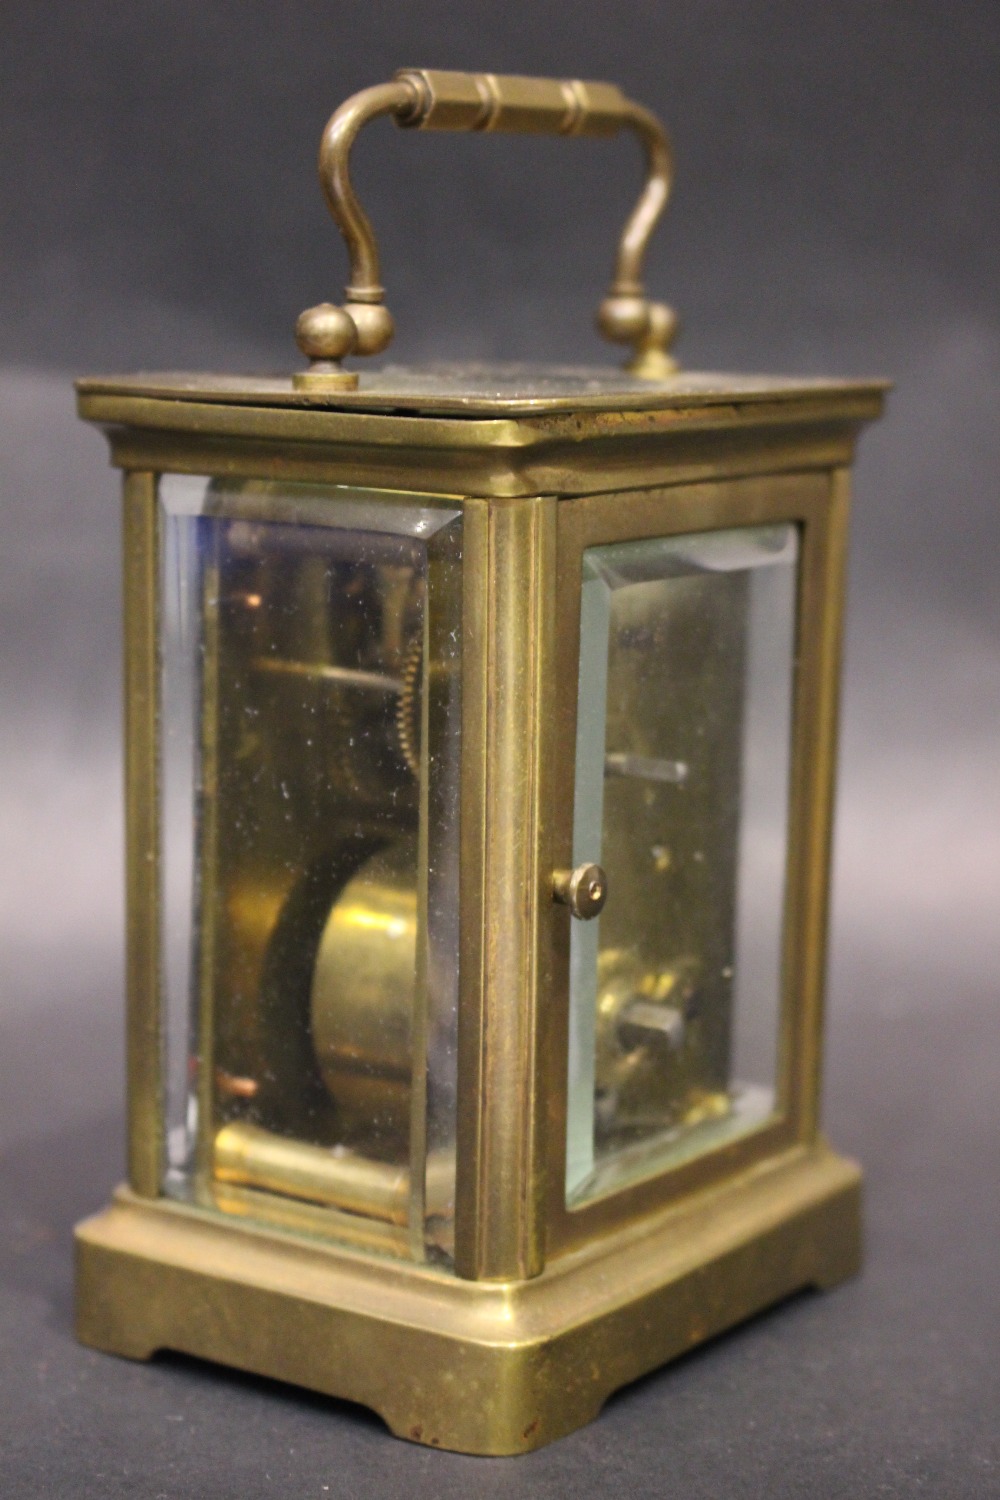 A FRENCH CASH CARRIAGE CLOCK, brass frame, bevelled glass on all sides, 5" x 4" x 3.5" approx case - Image 7 of 7